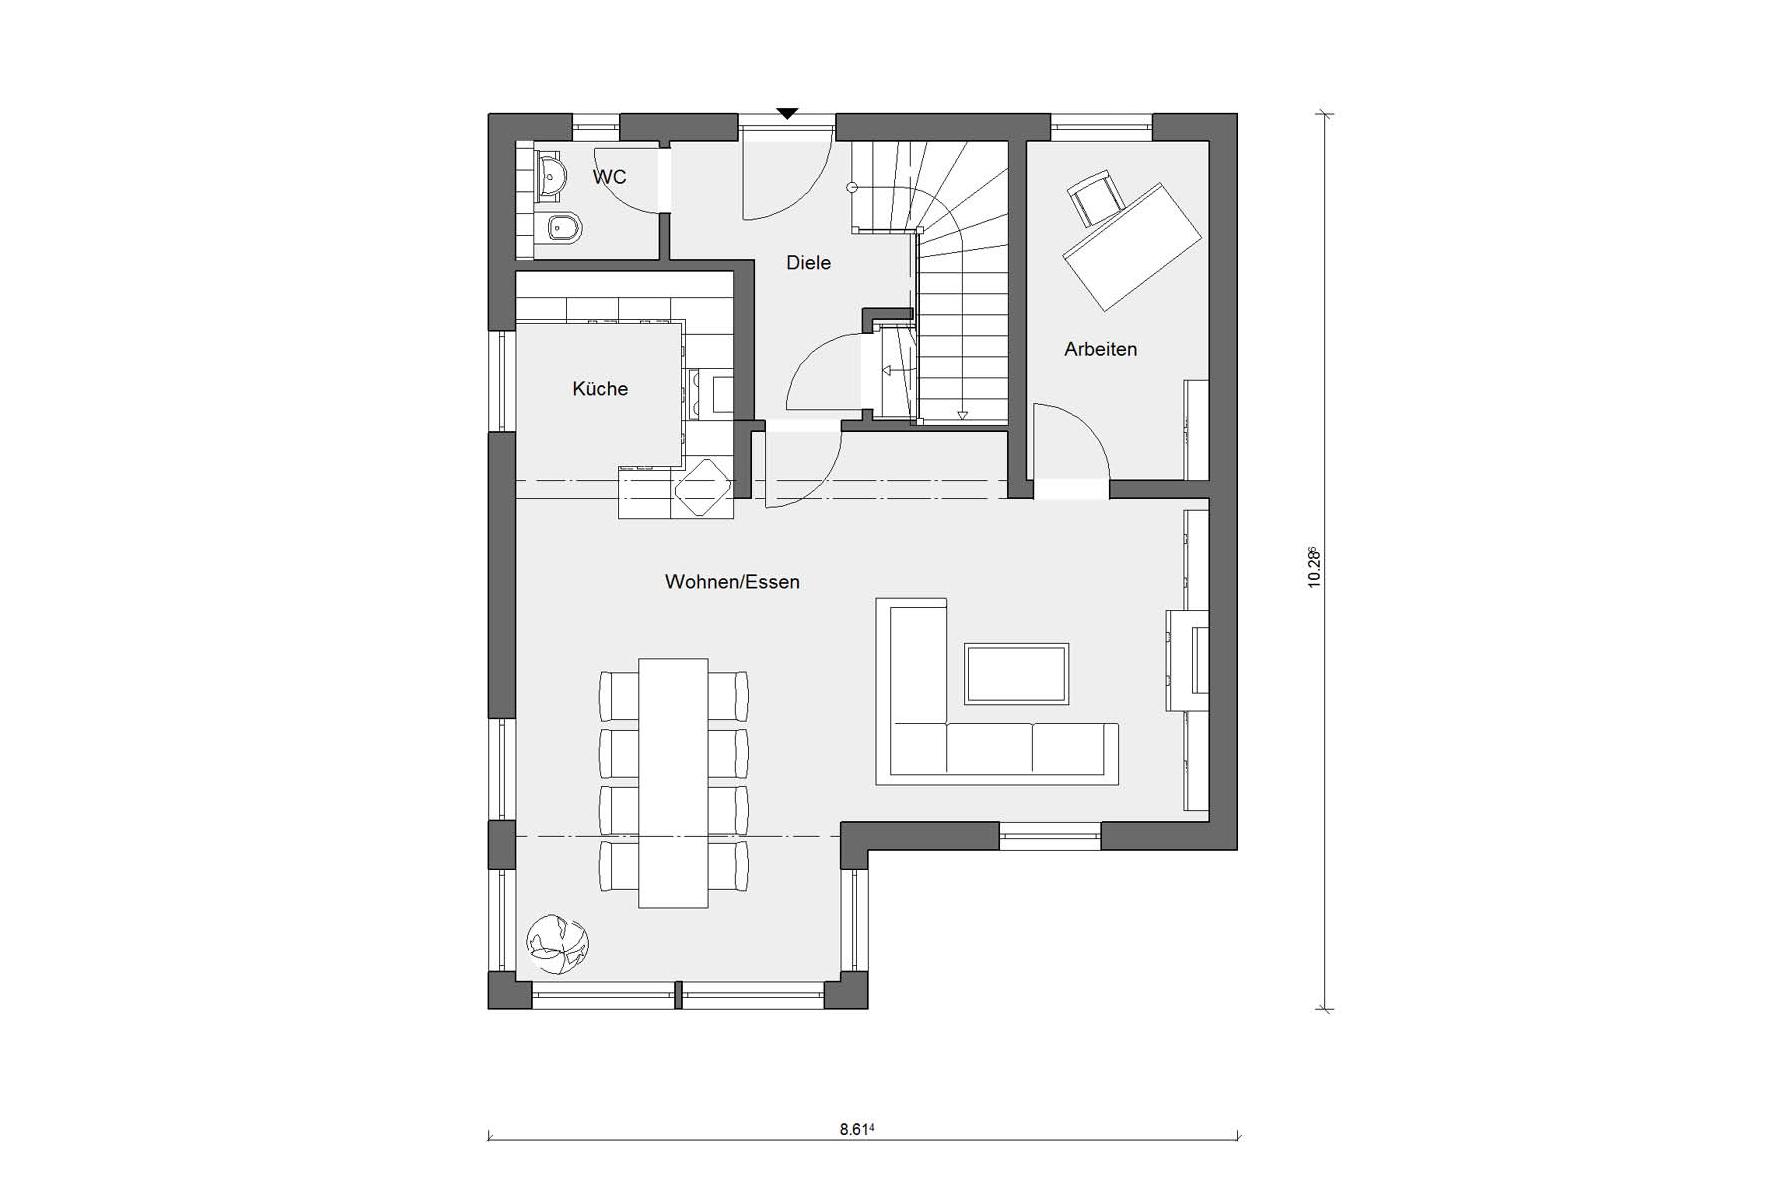 Ground floor layout E 15-125.3 House with large glass surfaces